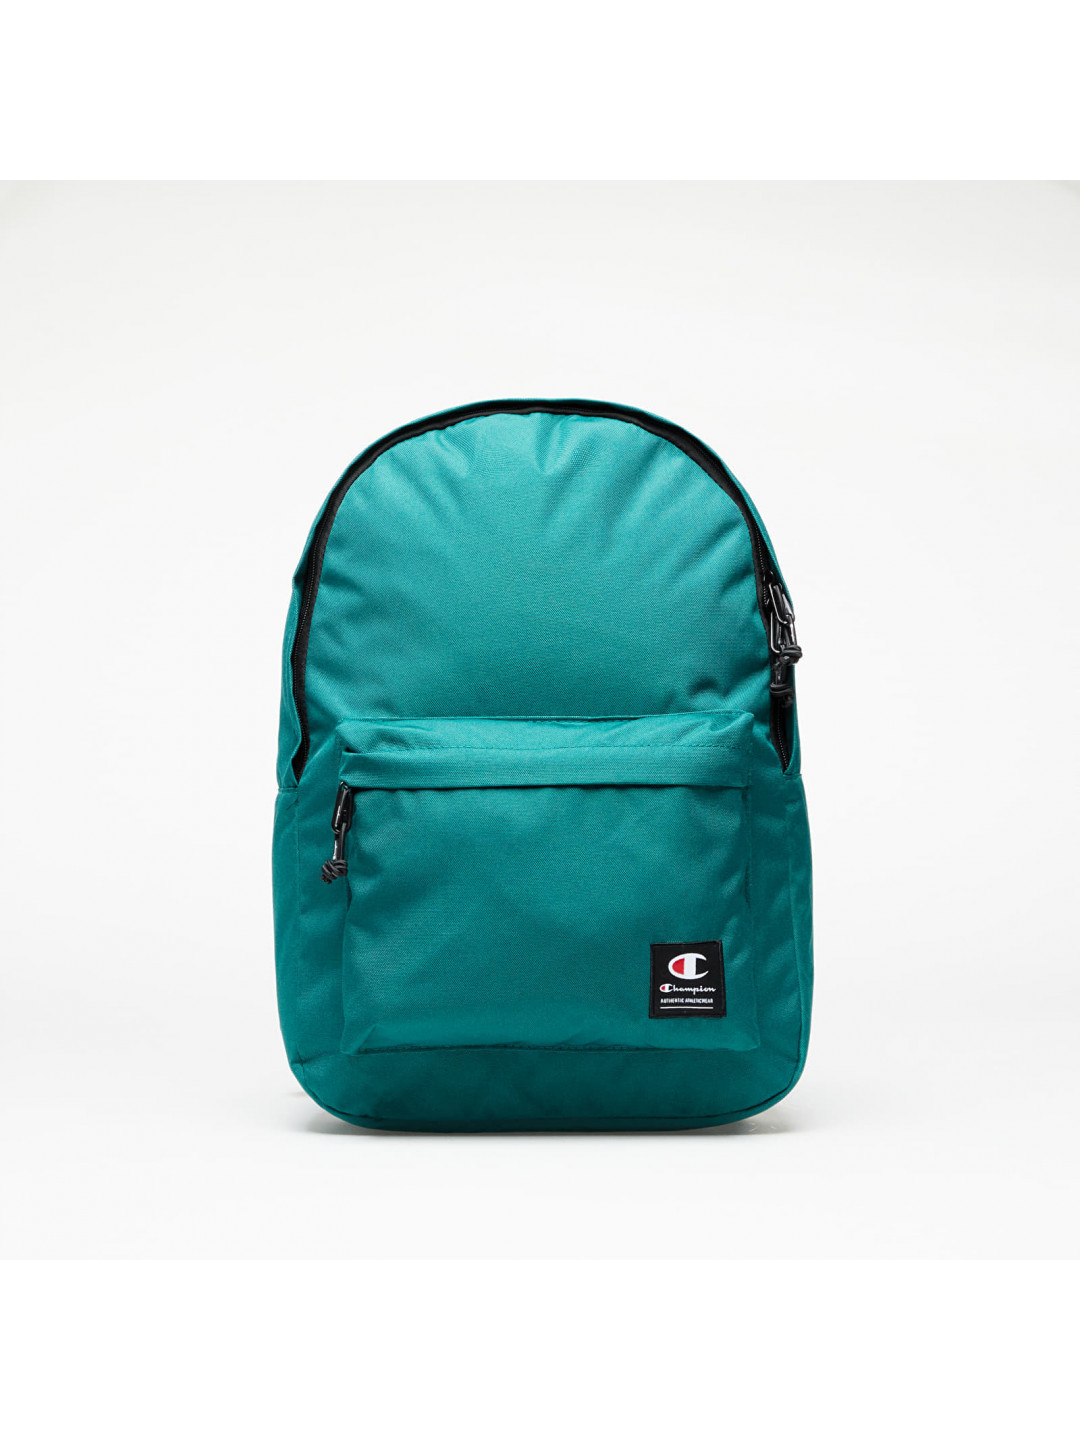 Champion Backpack Green